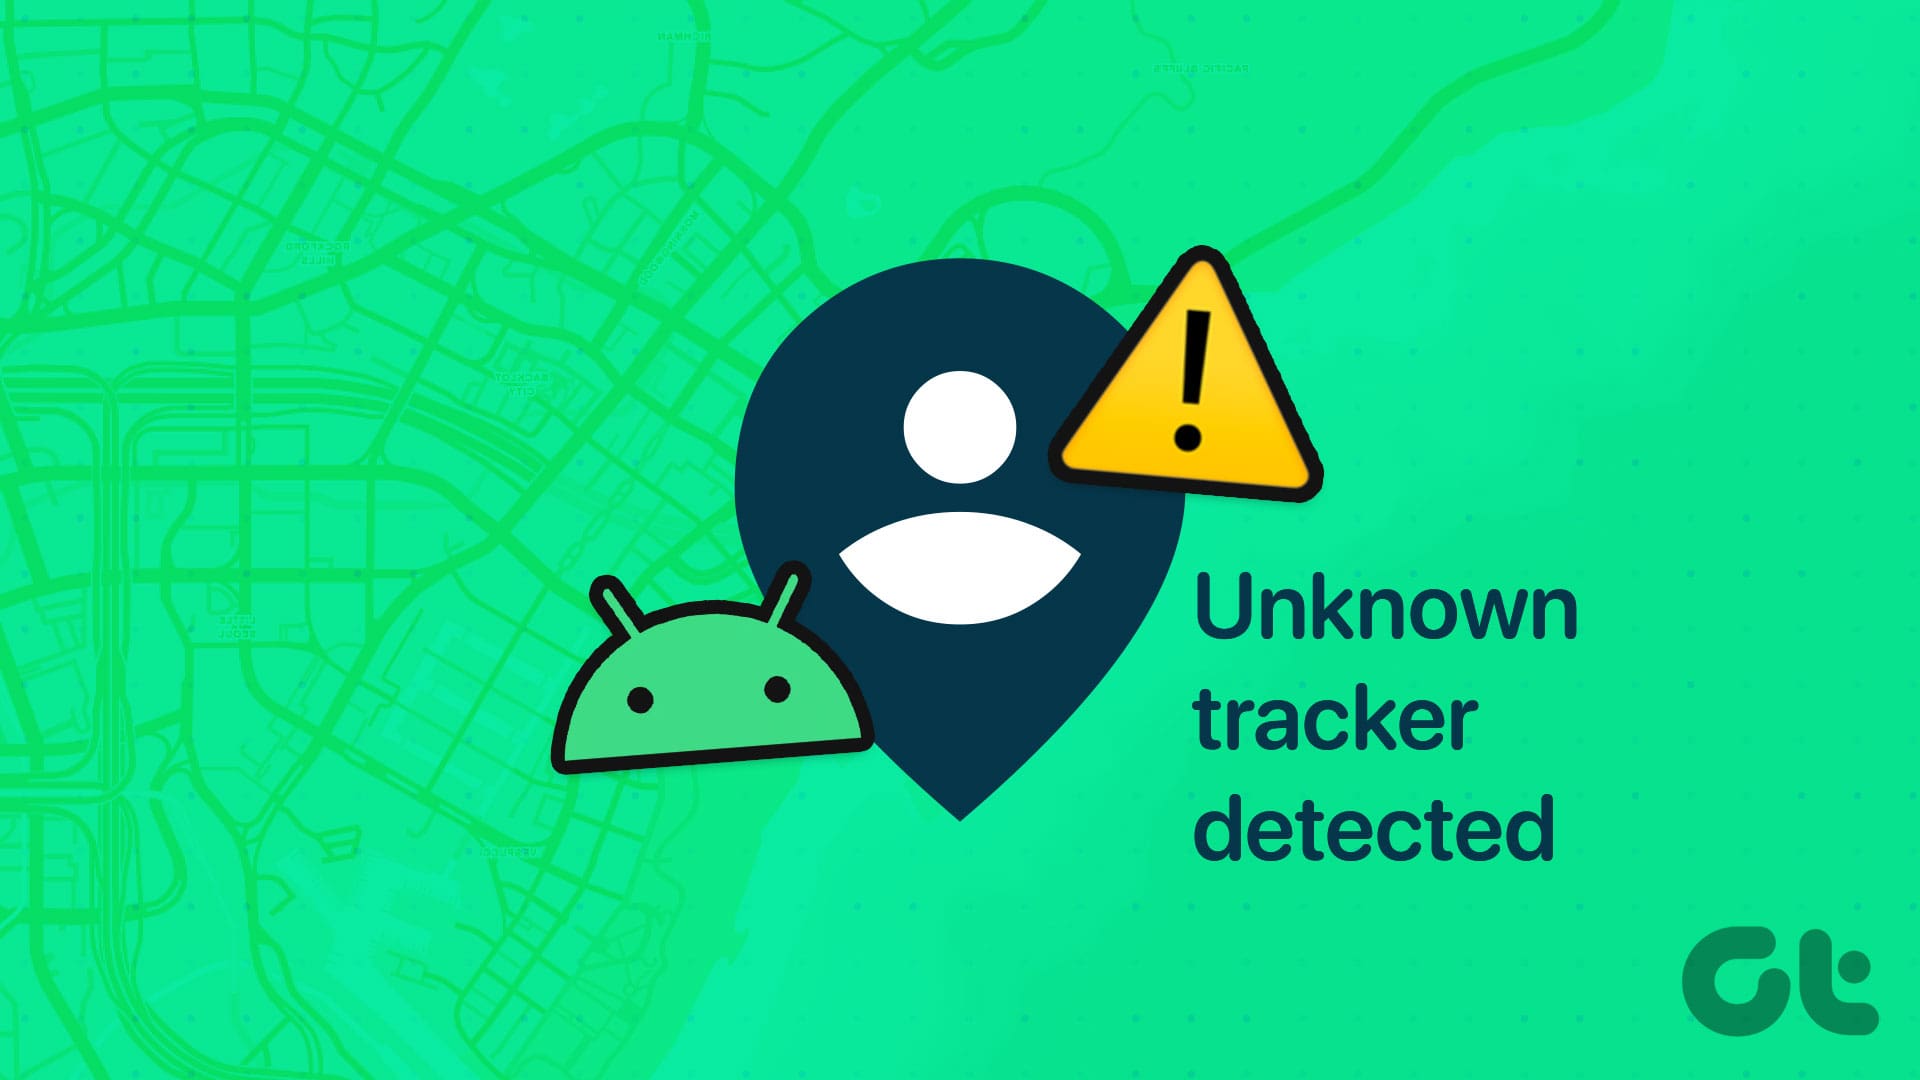 Find unknown trackers - Android Help